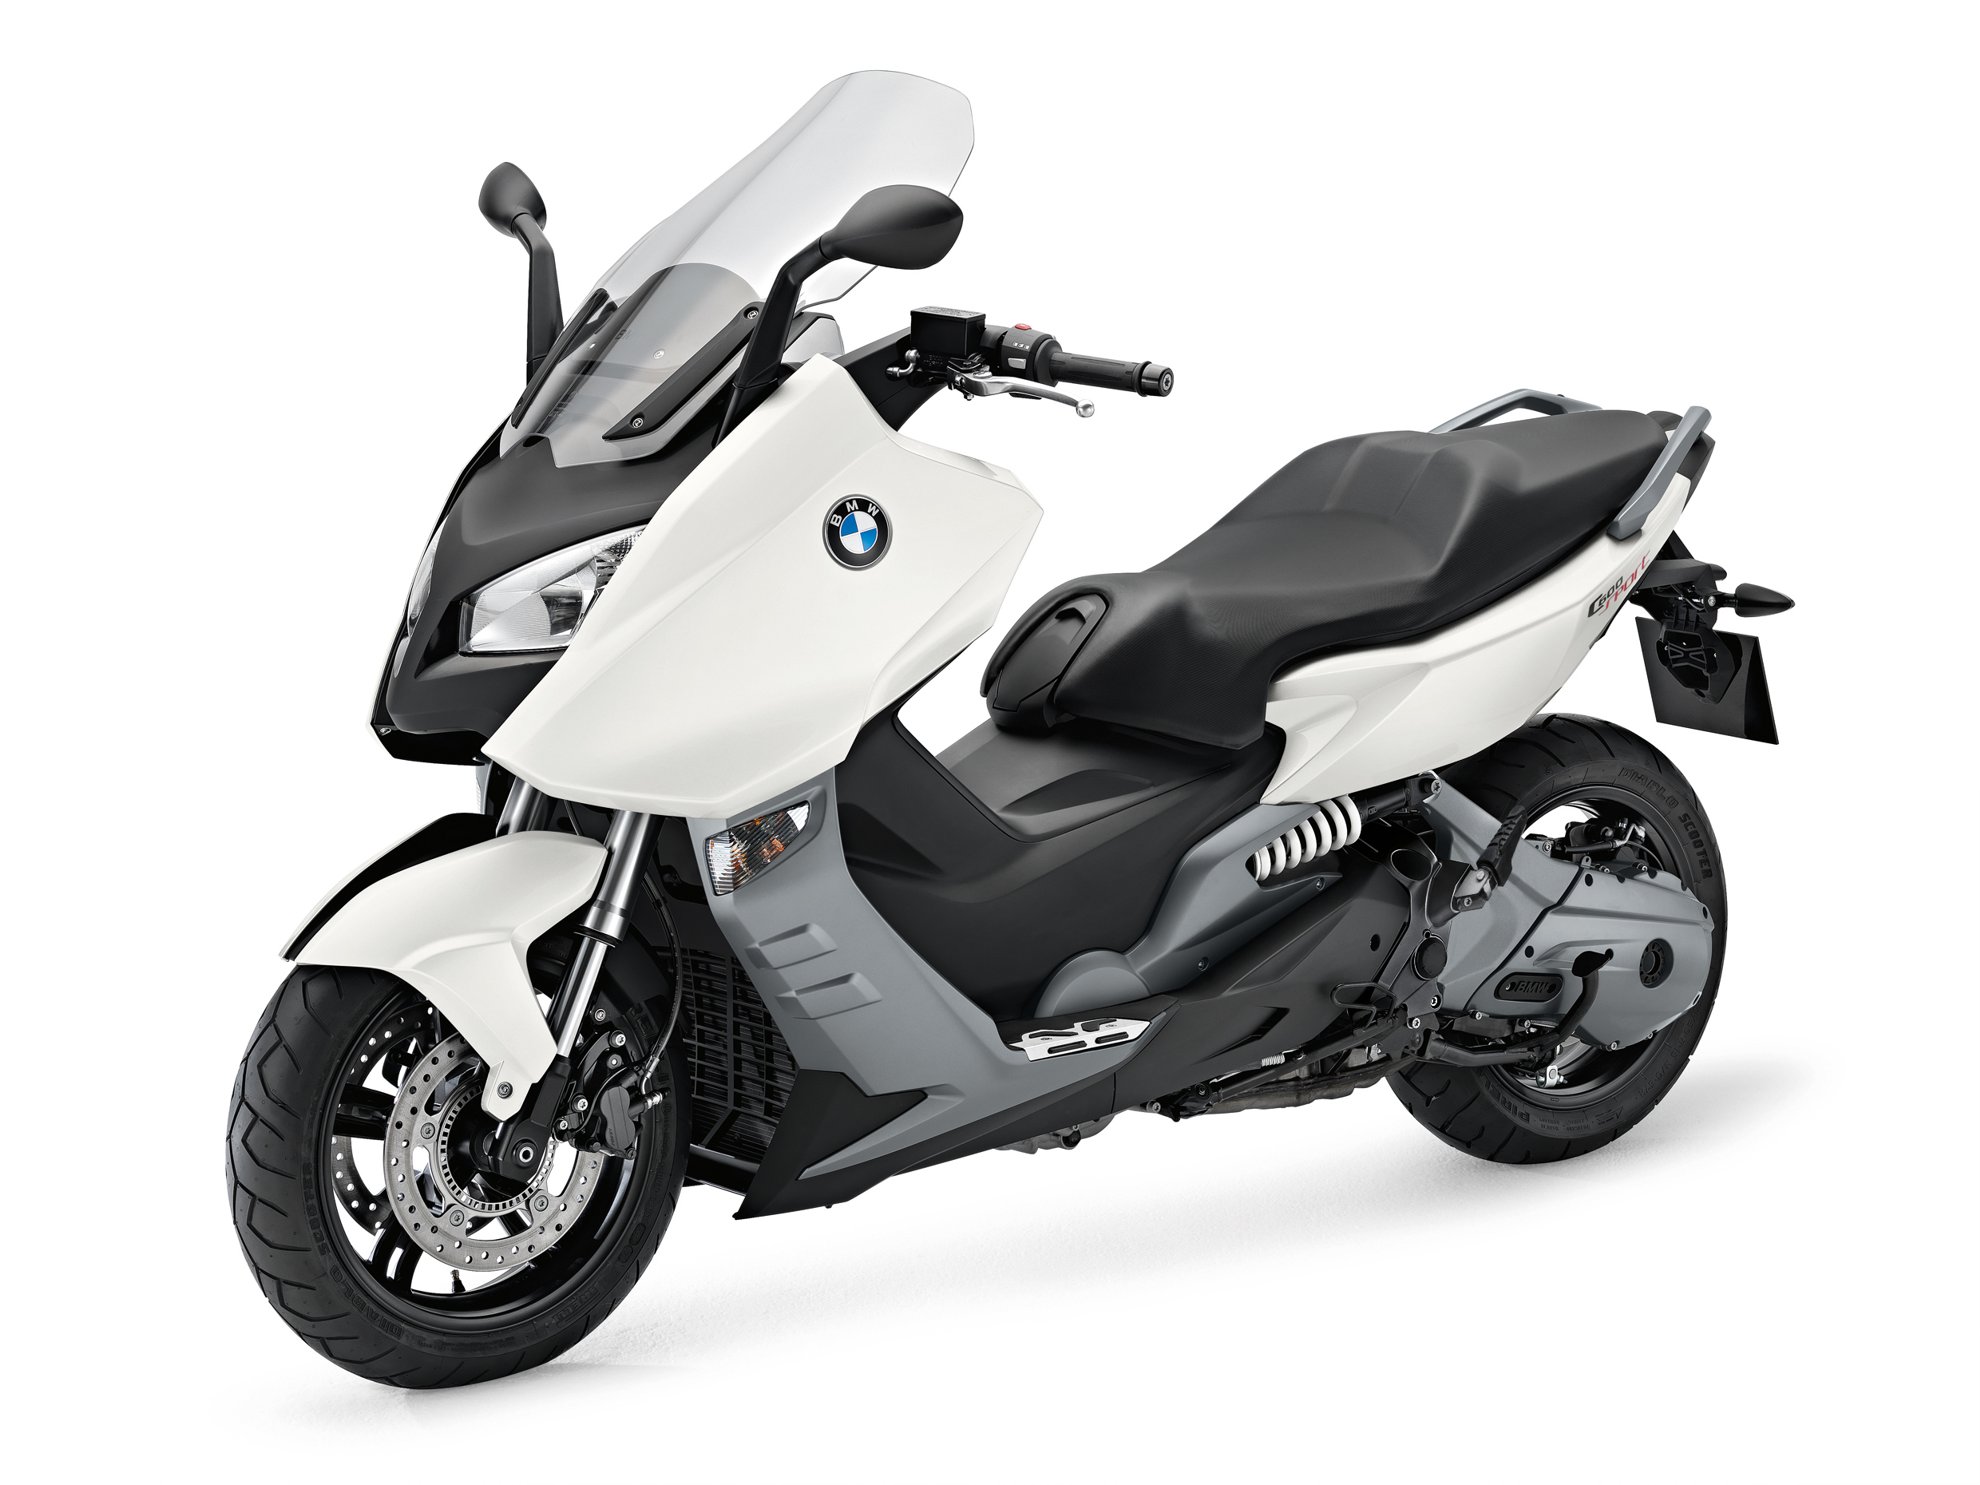 BMW Motorrad Motorcycles facelift measures for the model year 2014